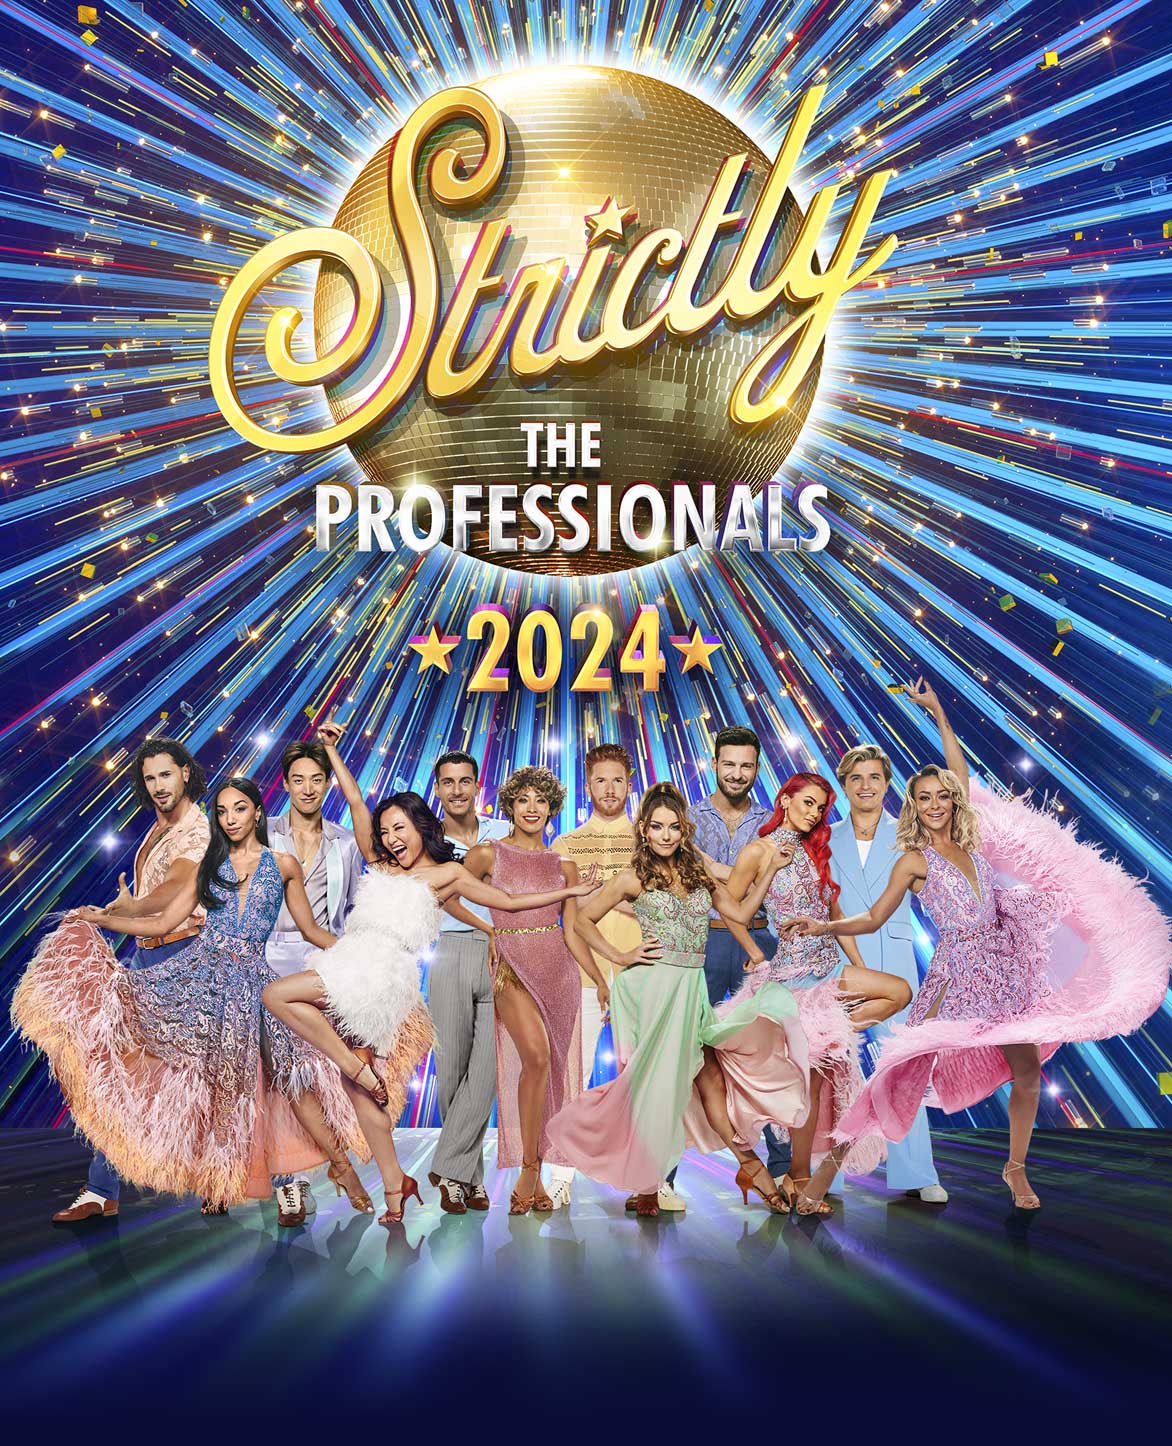 strictly professionals tour sheffield